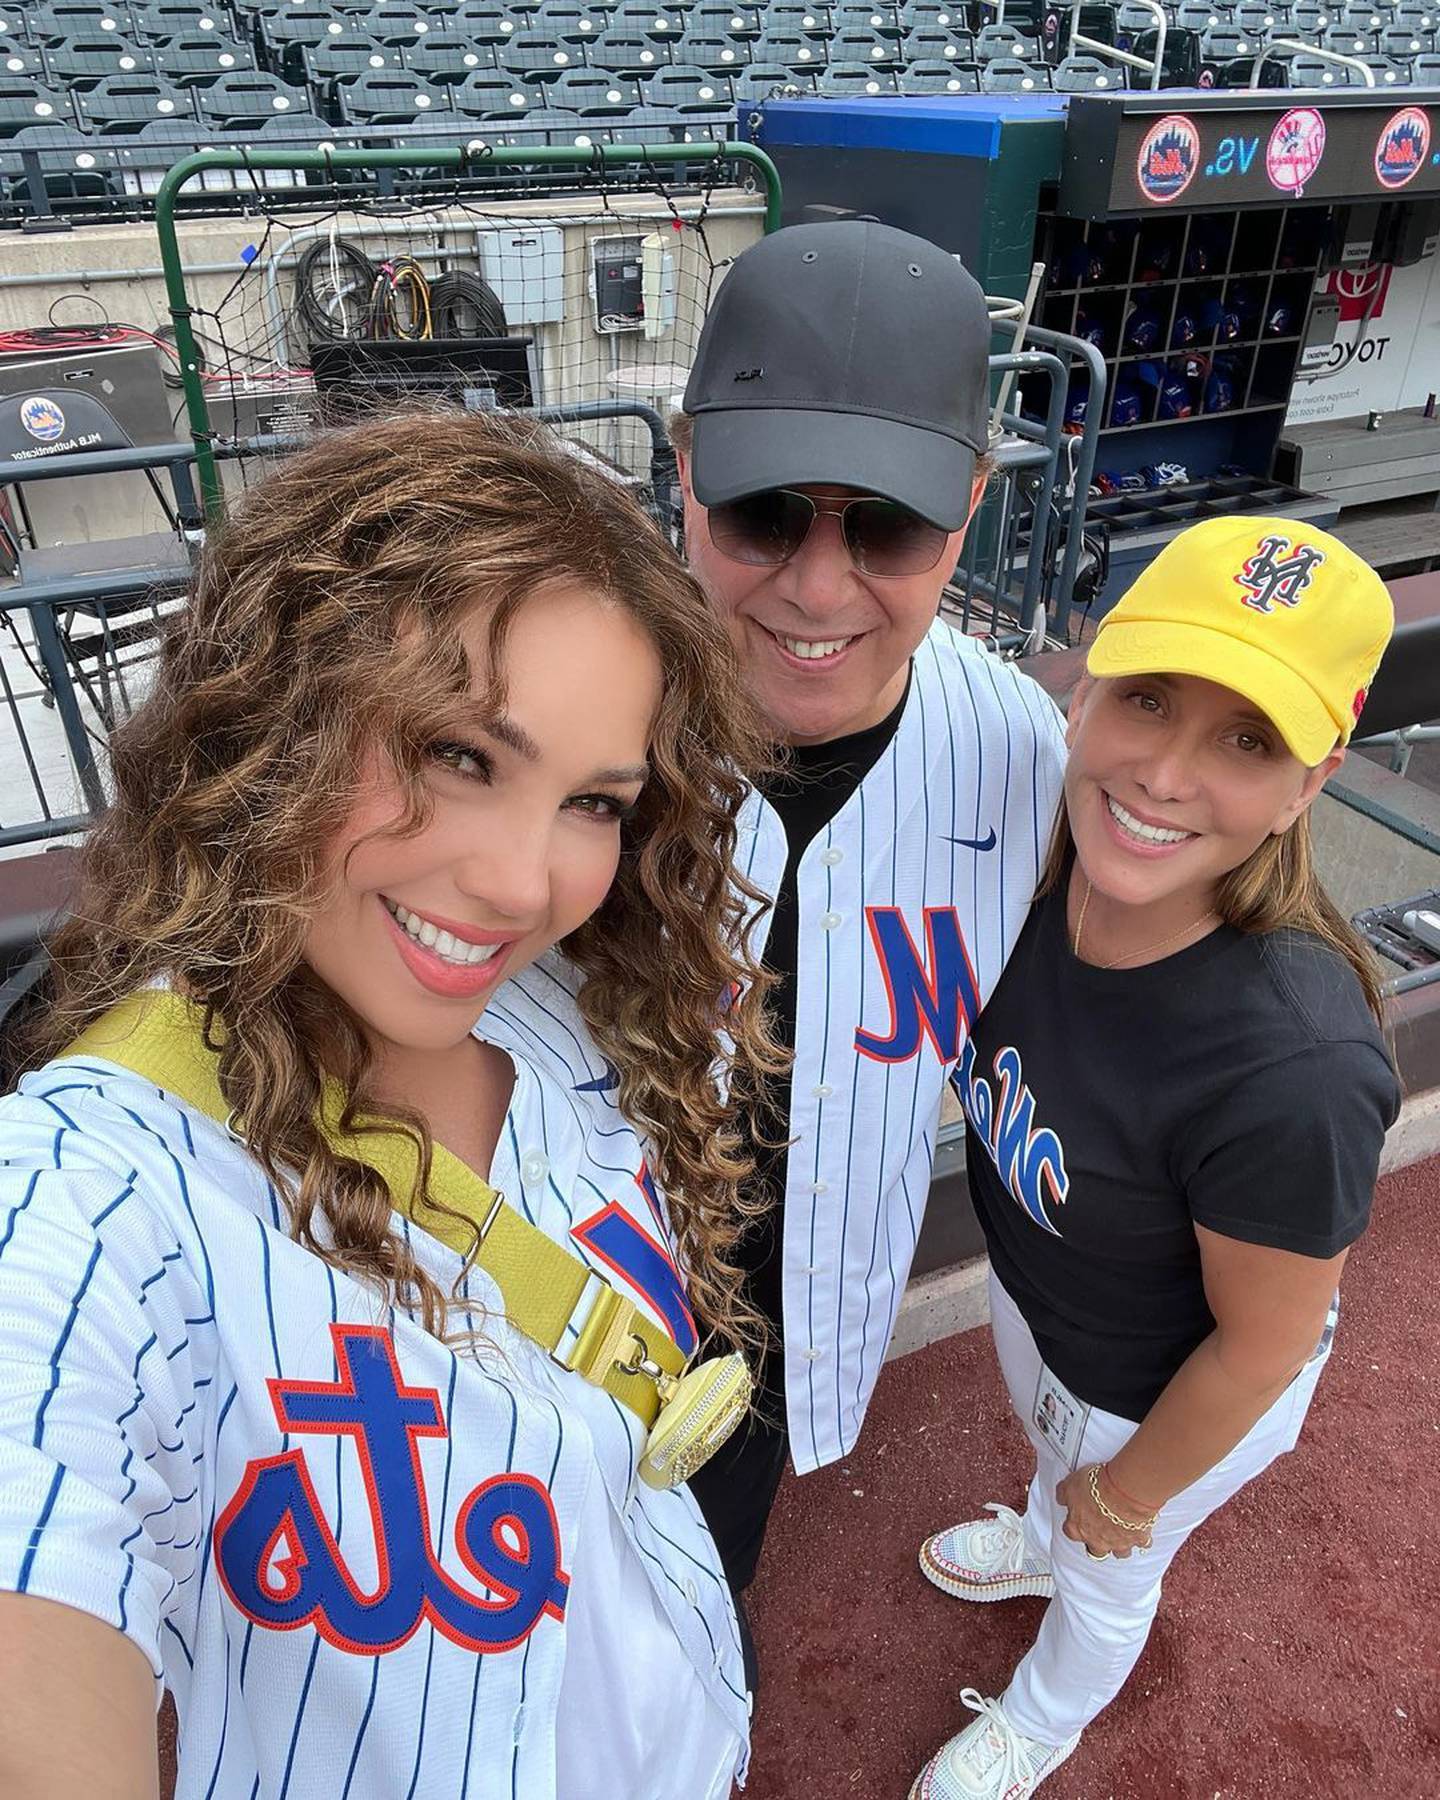 In front of the fans, Thalía seems unrecognizable